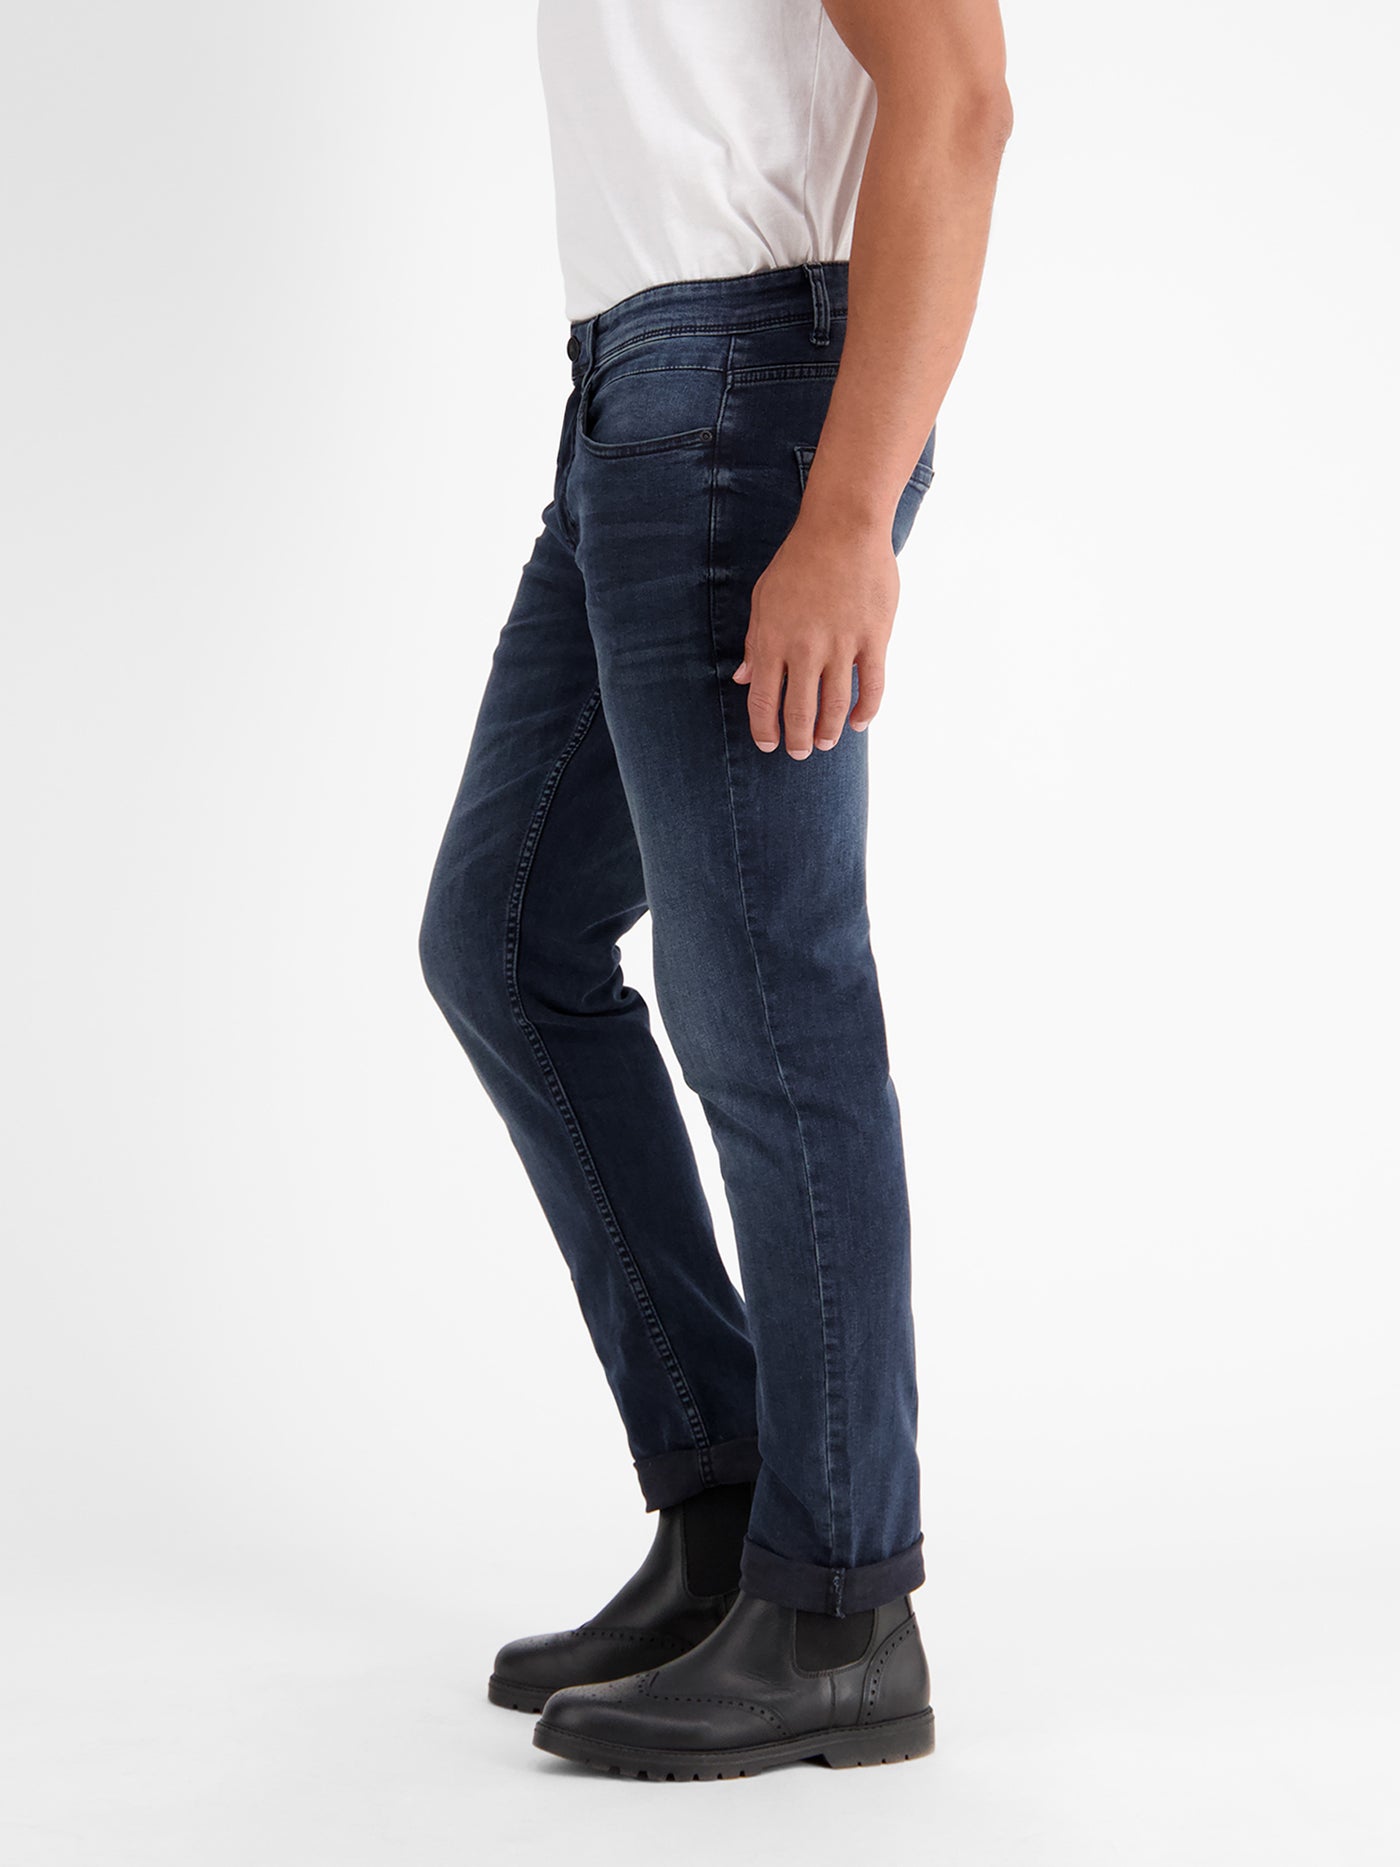 BAXTER 5-POCKET-Denim-Style, Relaxed Fit